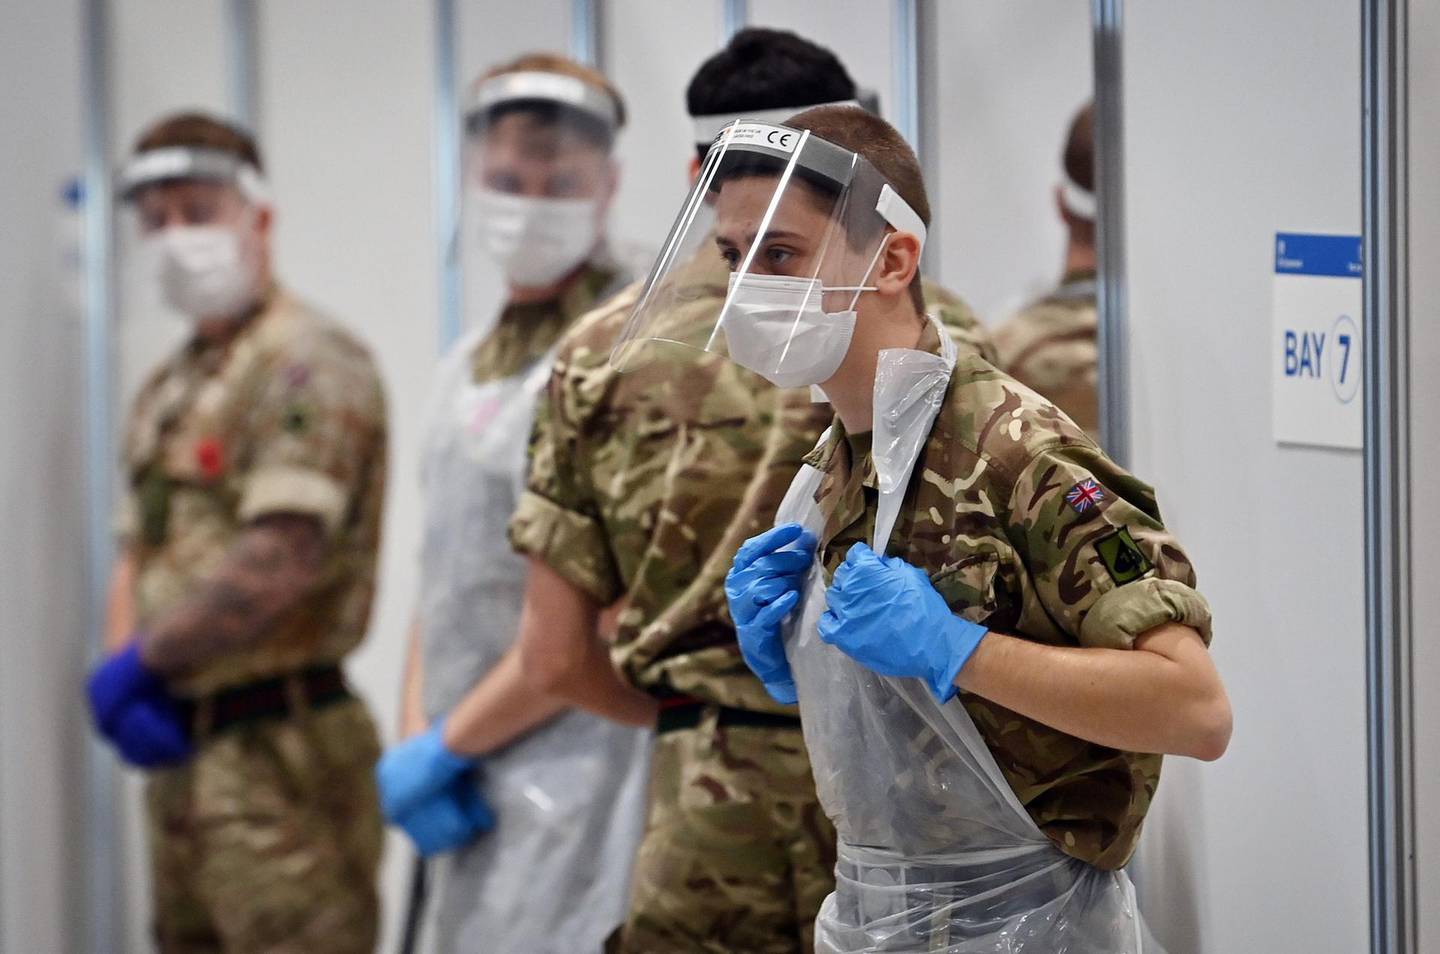 Soldiers wearing full PPE (personal protective equipment) in the form of face shields, gloves, face masks and bibs wait to assist covid testing at a coronavirus rapid testing centre in the Liverpool exhibition centre in Liverpool, north-west England on November 11, 2020, during a city-wide mass testing pilot operation.  Liverpool on November 6 began England's first city-wide trial of coronavirus testing in an attempt to prevent hospitals becoming overwhelmed during the country's second wave of the pandemic. All of the northwestern city's 500,000 residents as well as people working there will be offered repeat tests, even if asymptomatic, under the pilot trial, which will initially run for two weeks.


 / AFP / Paul ELLIS
